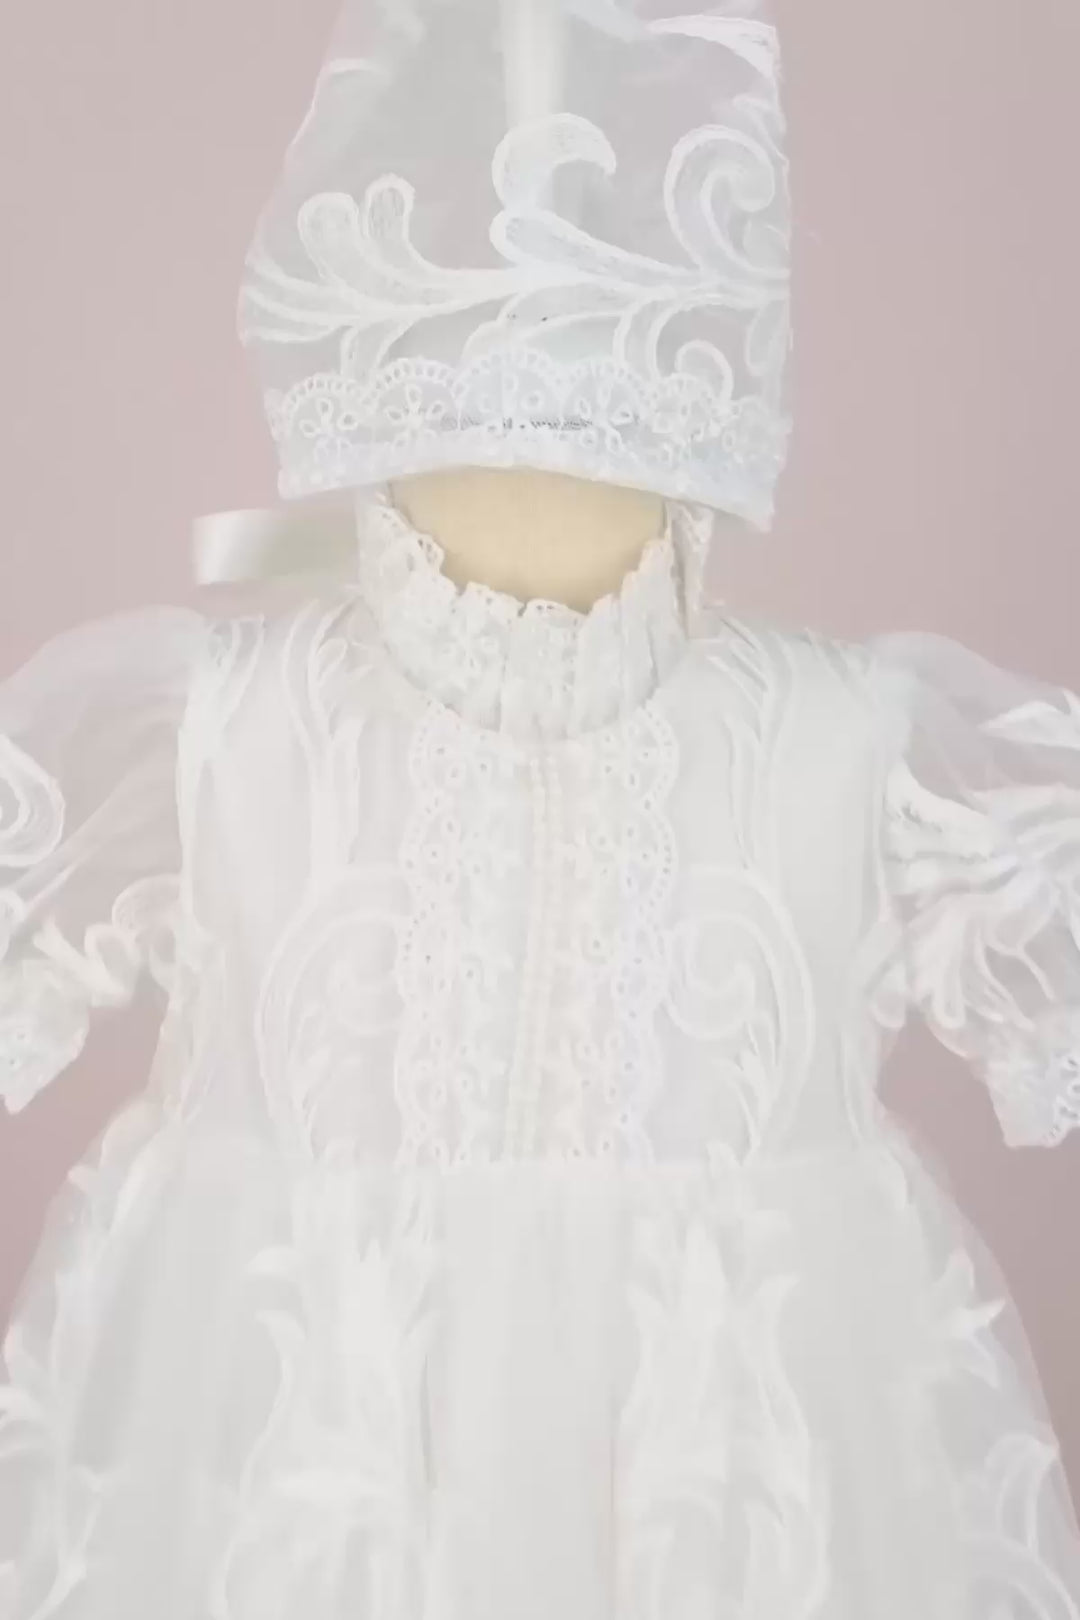 360° view of a white half sleeve baptism dress and baptismal bonnet. The dress is floor length and has French lace